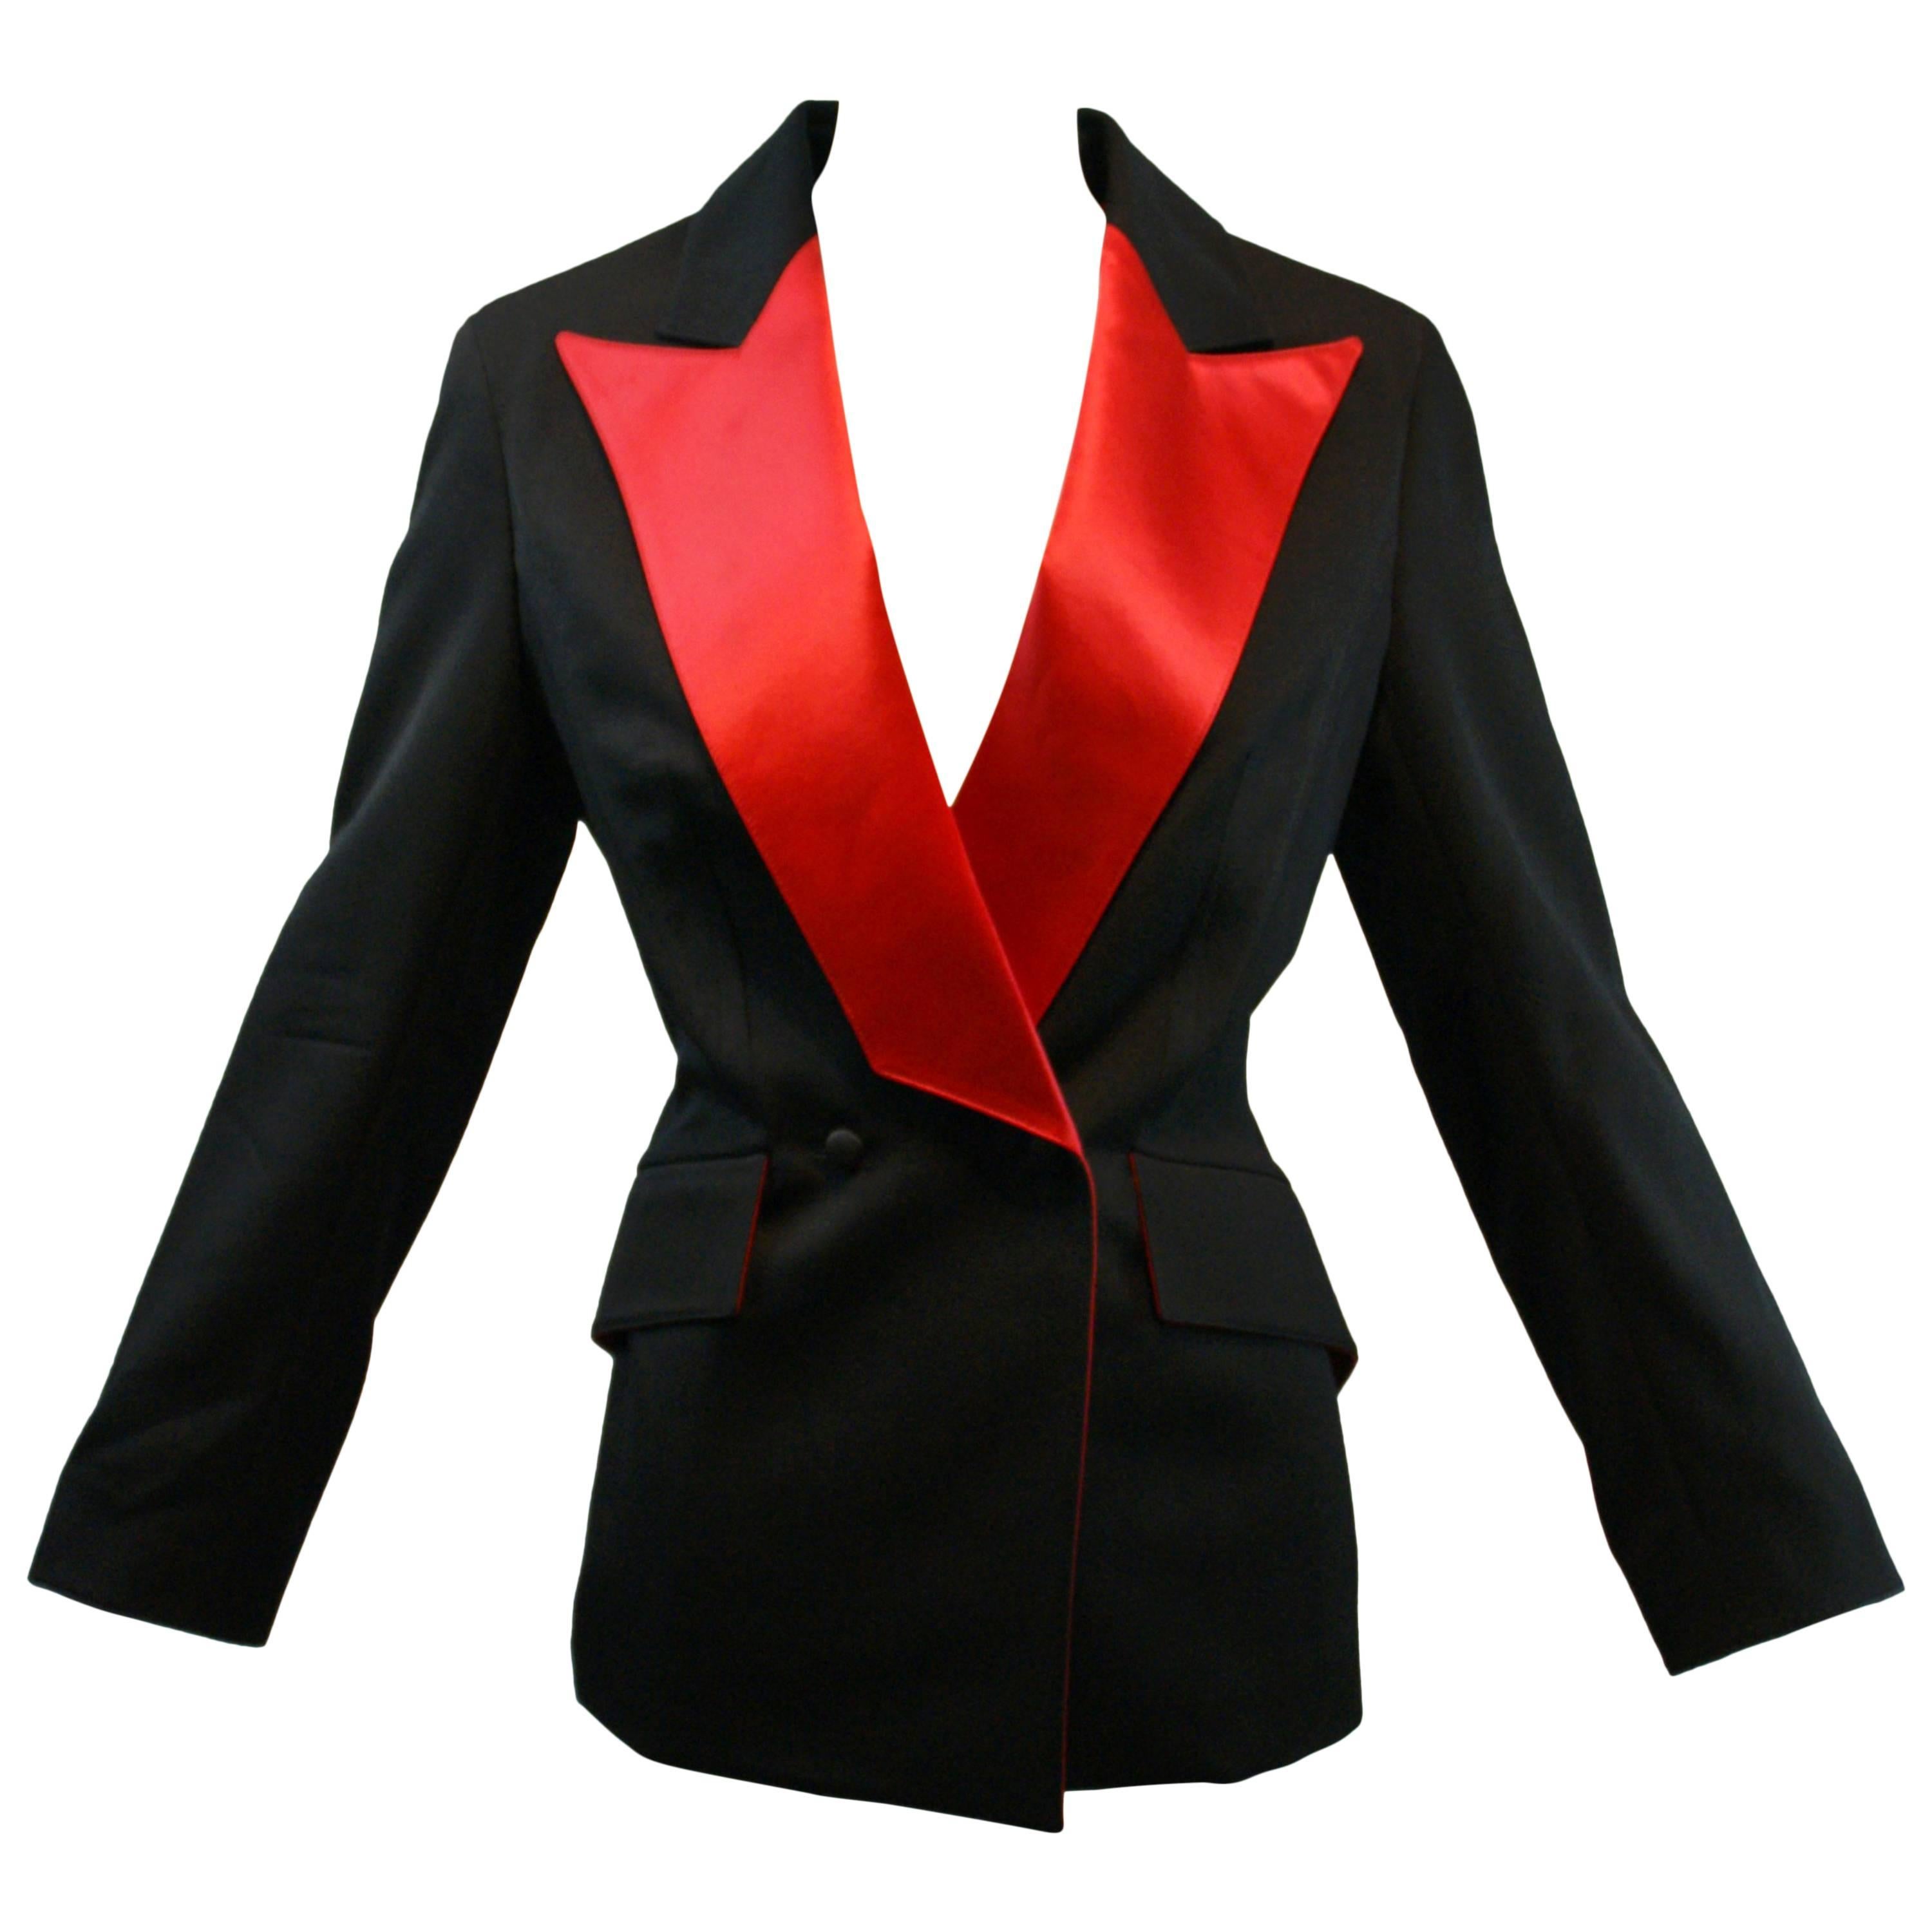 A/W 2001 Thierry Mugler Couture Runway Red Satin Black Tuxedo Jacket 40